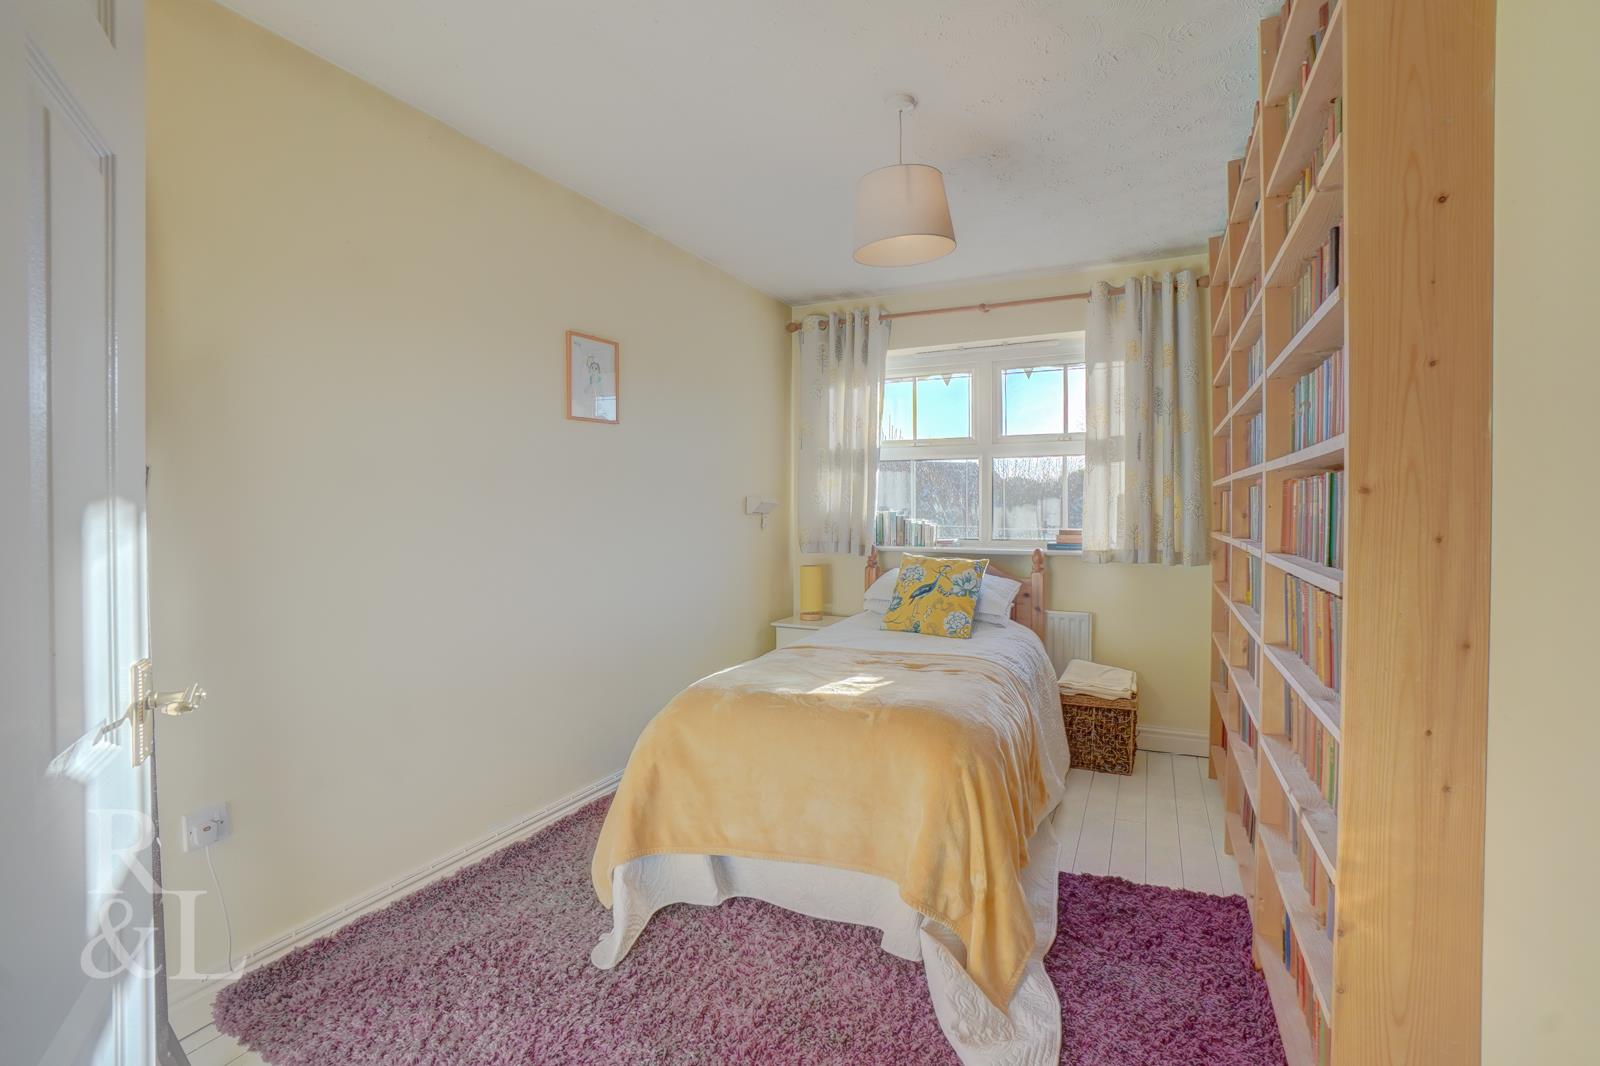 Property image for Beehive Avenue, Moira